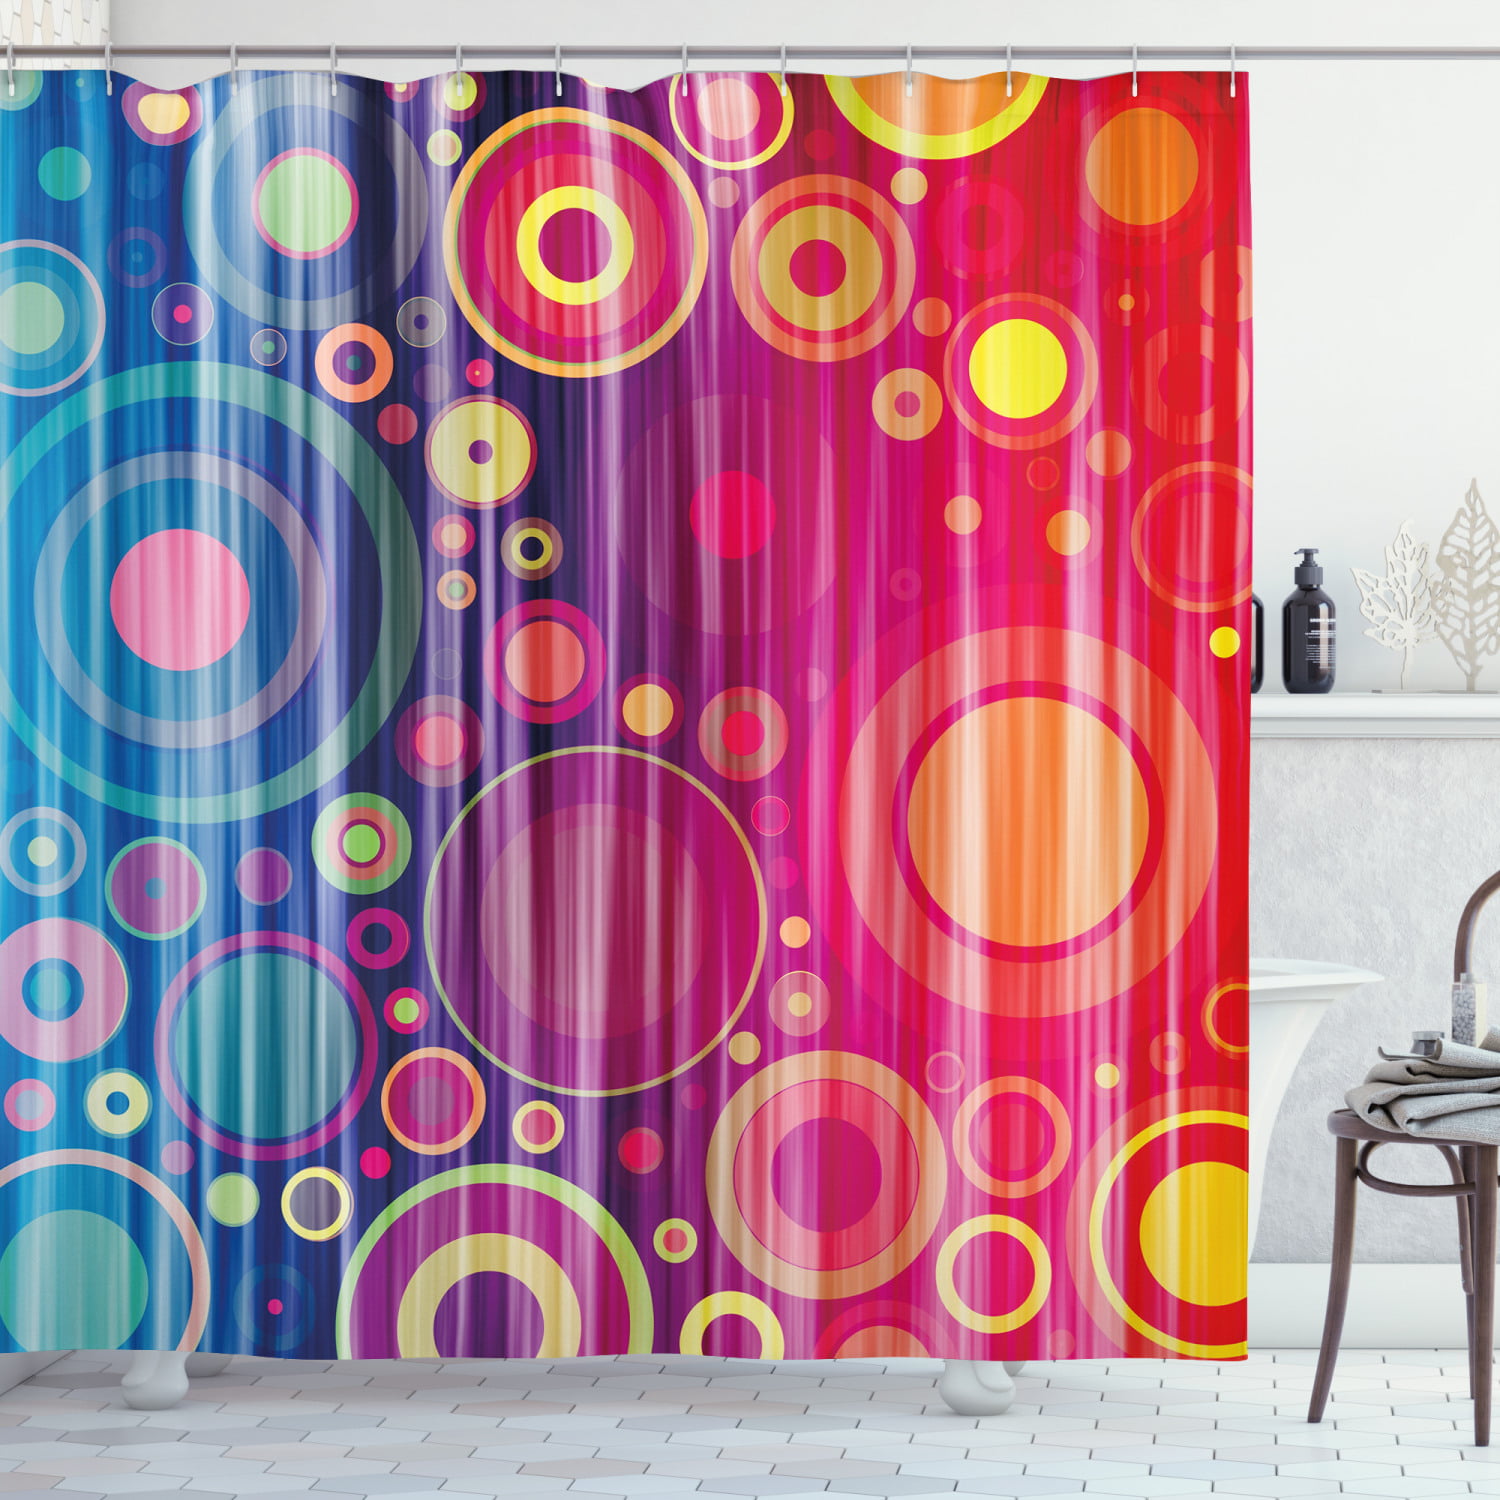 Blue Psychedelic Picture Bathroom Waterproof Fabric Shower Curtain 12 Hooks 